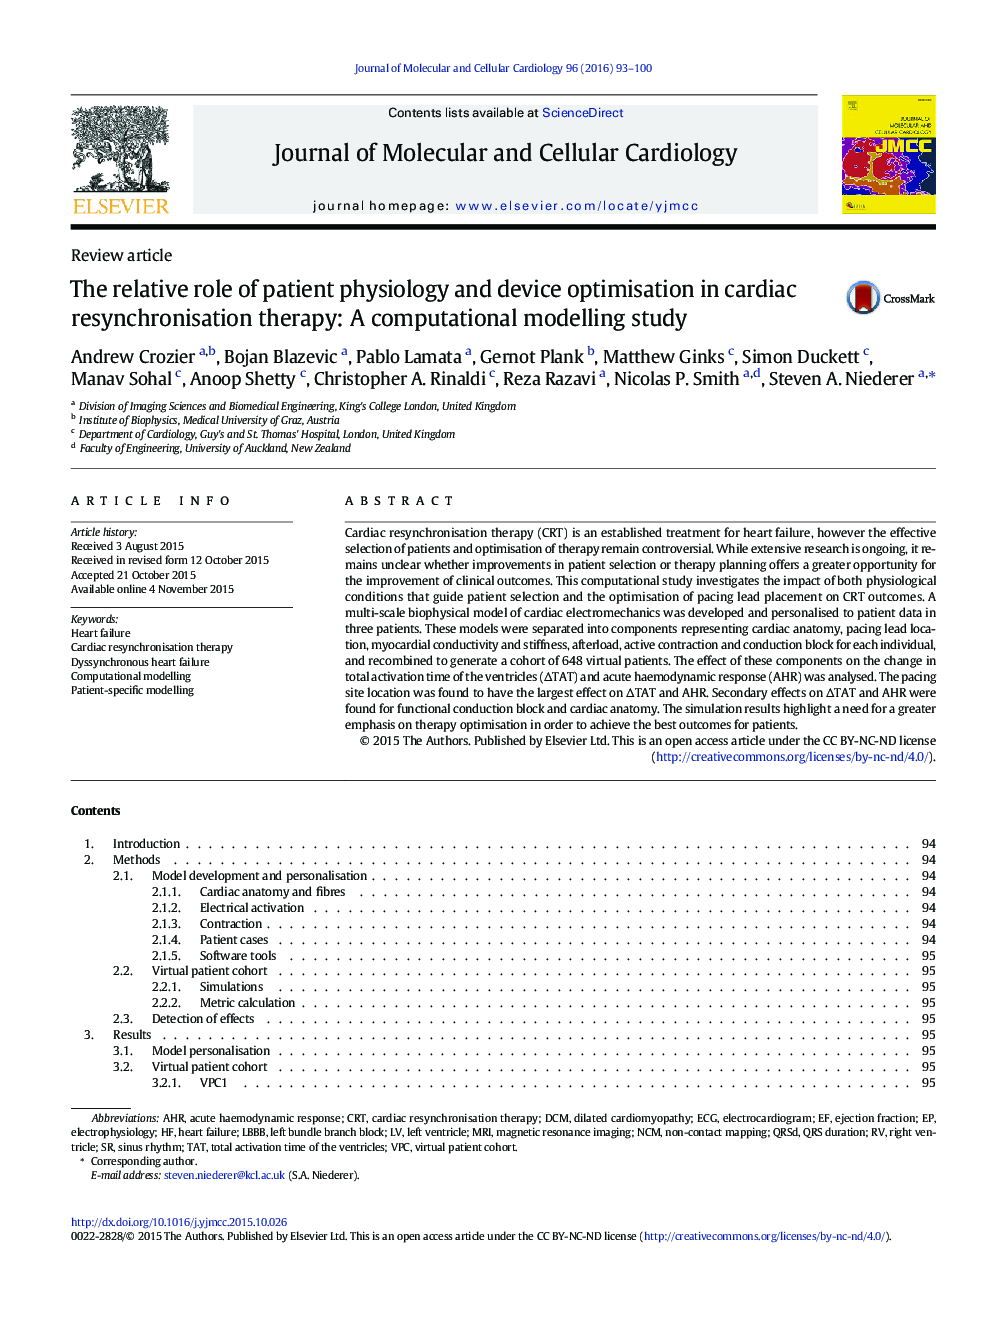 The relative role of patient physiology and device optimisation in cardiac resynchronisation therapy: A computational modelling study